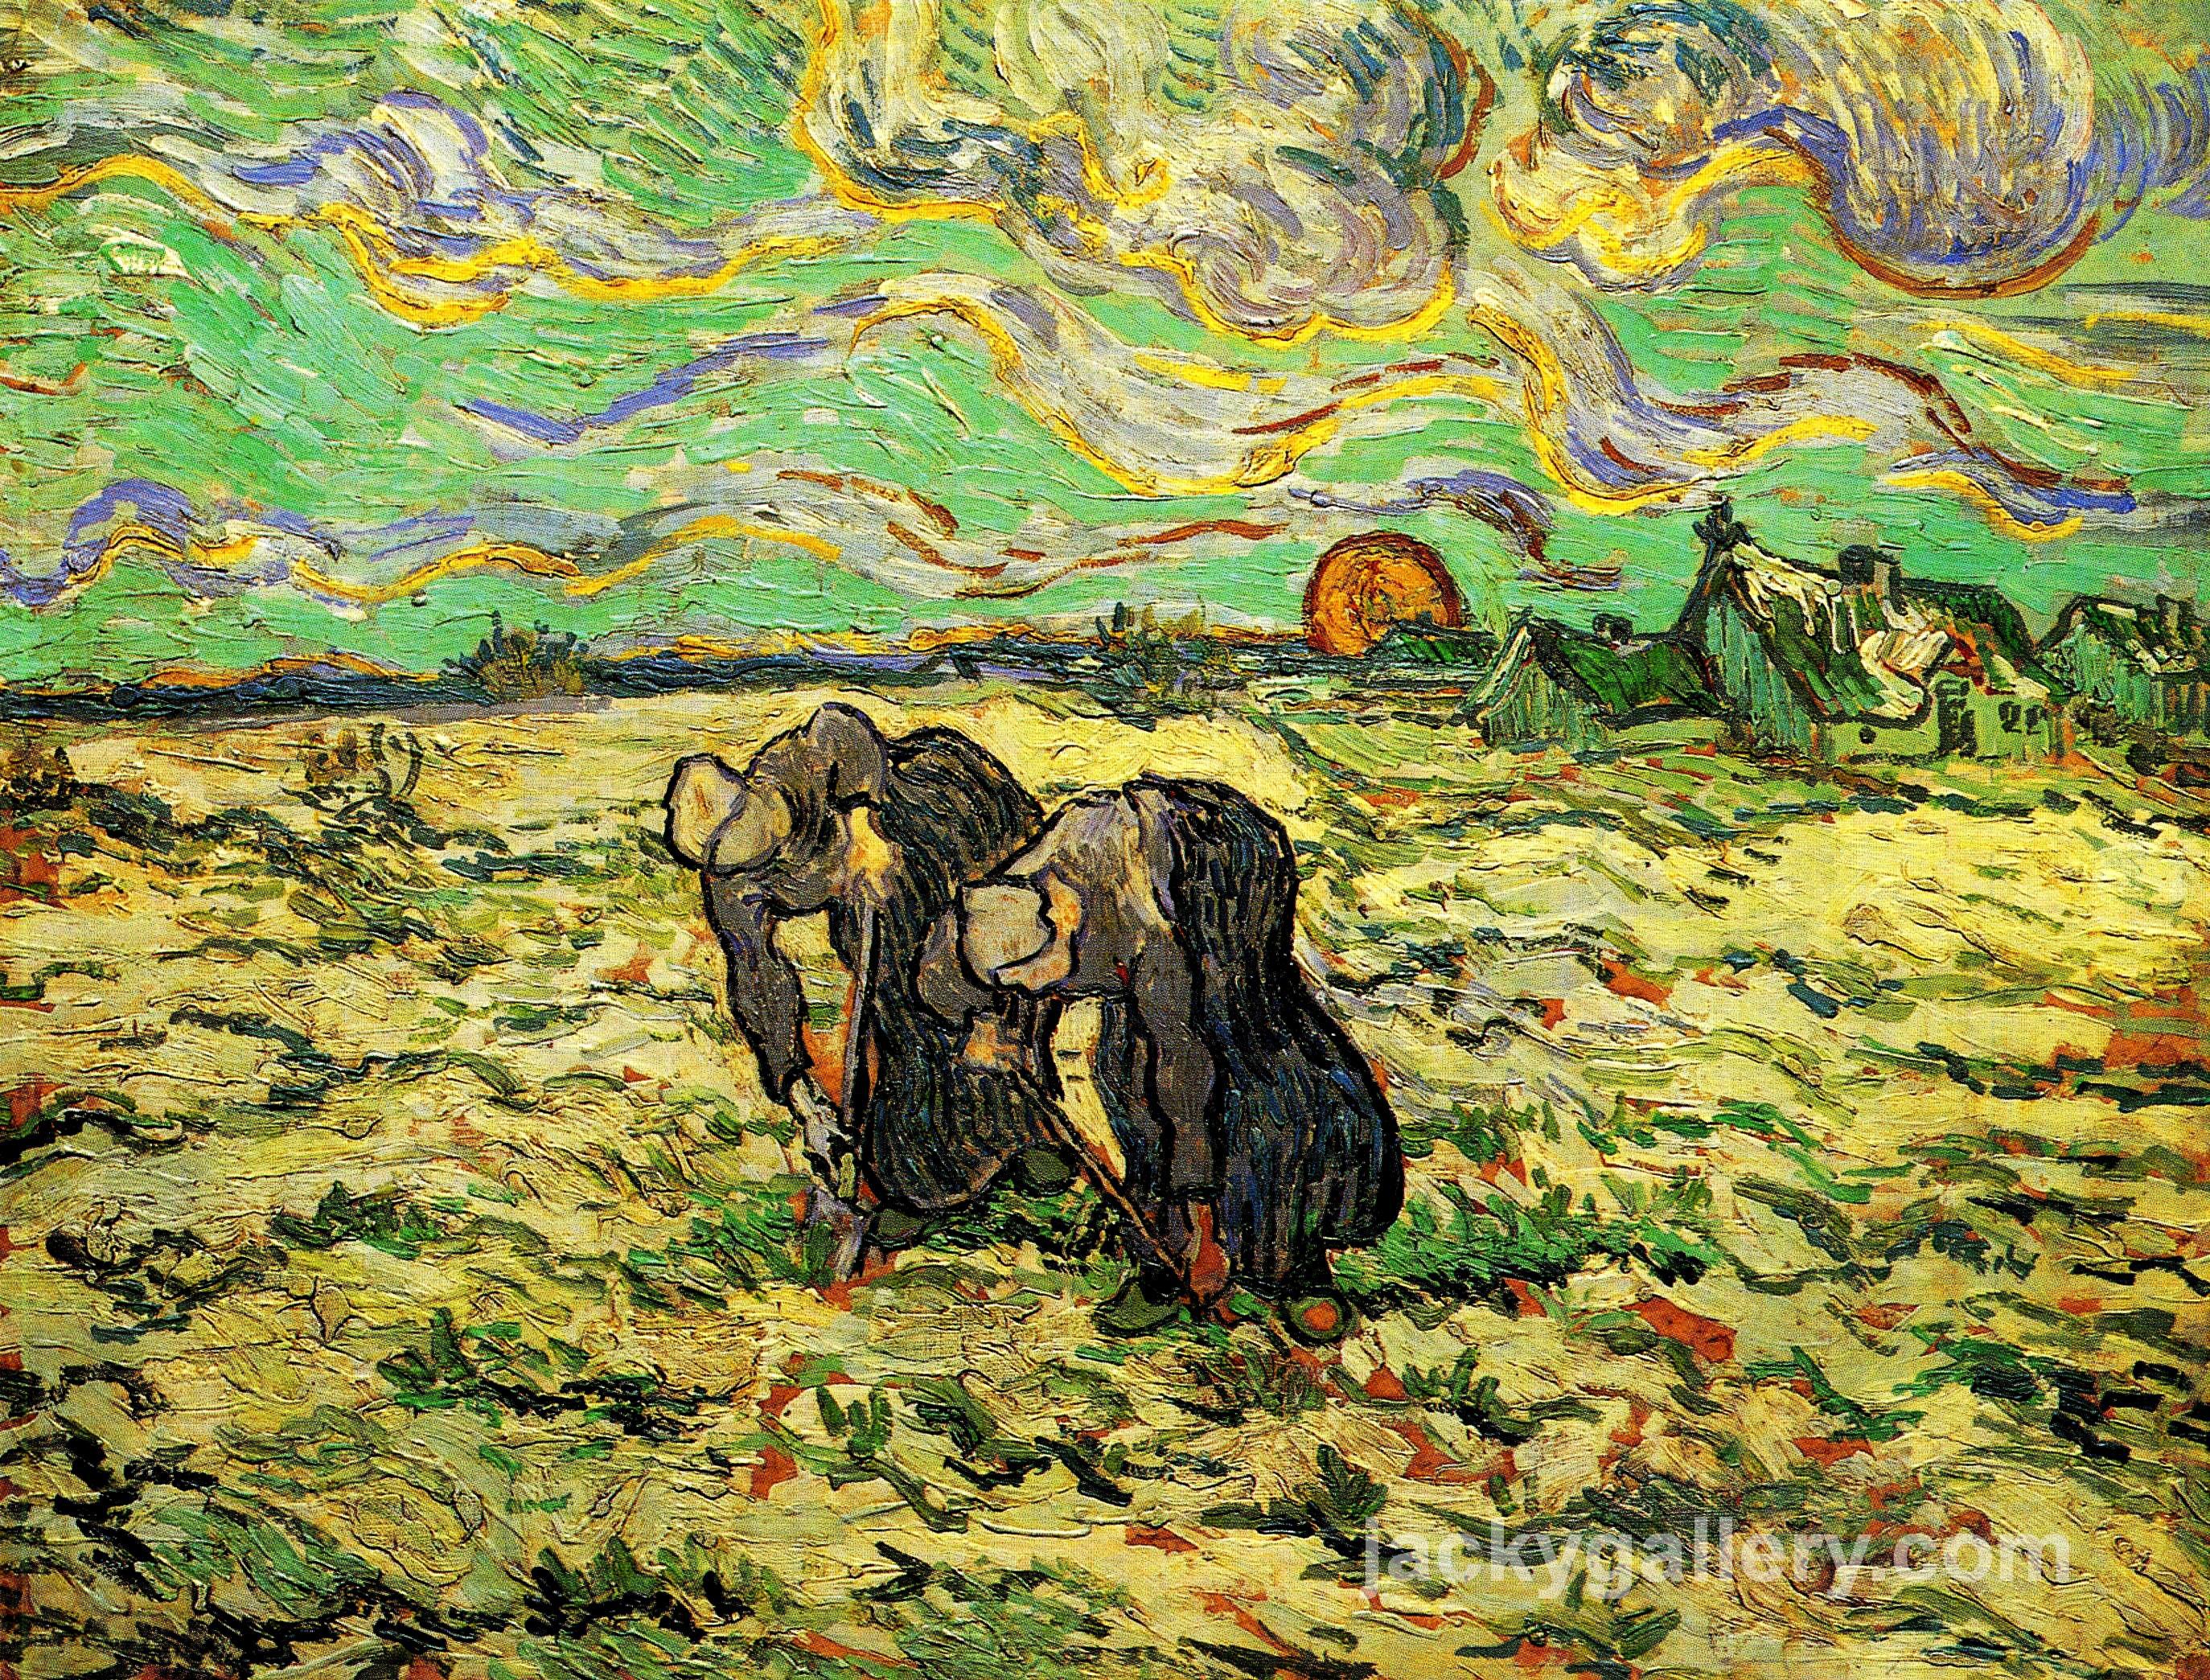 Two Peasant Women Digging in Field with Snow, Van Gogh painting